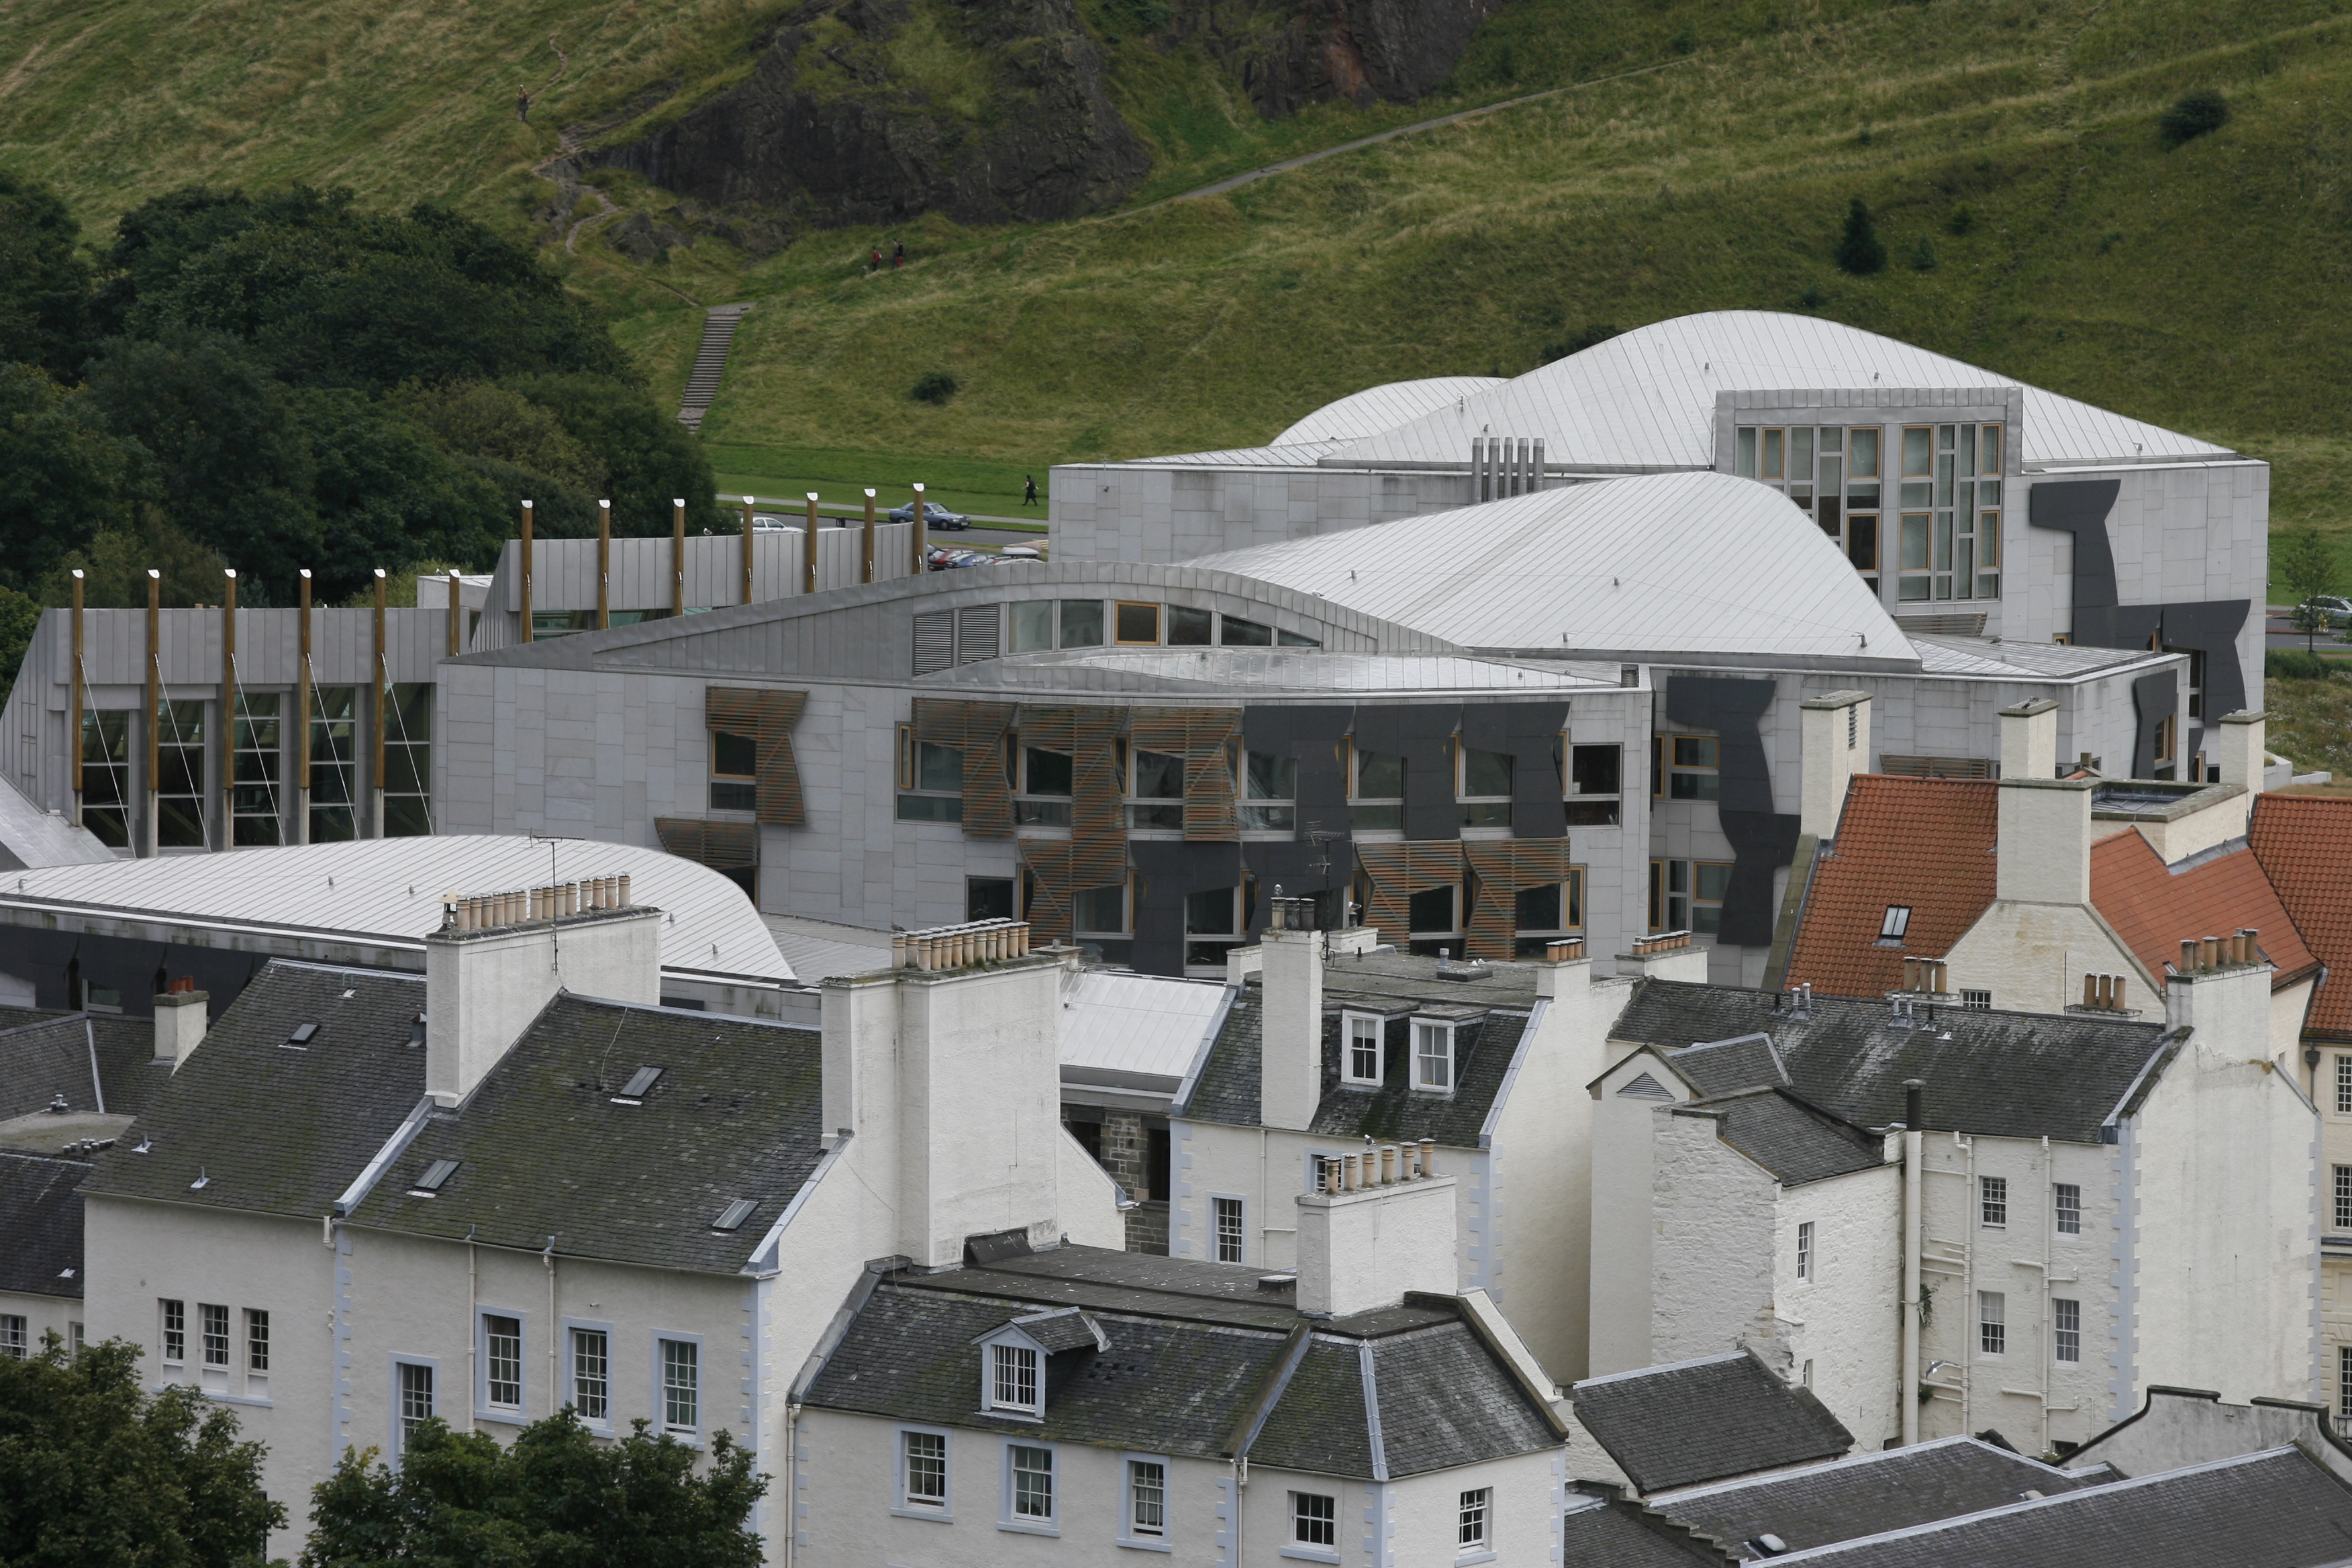 Photograph of the Scottish Parliament building.